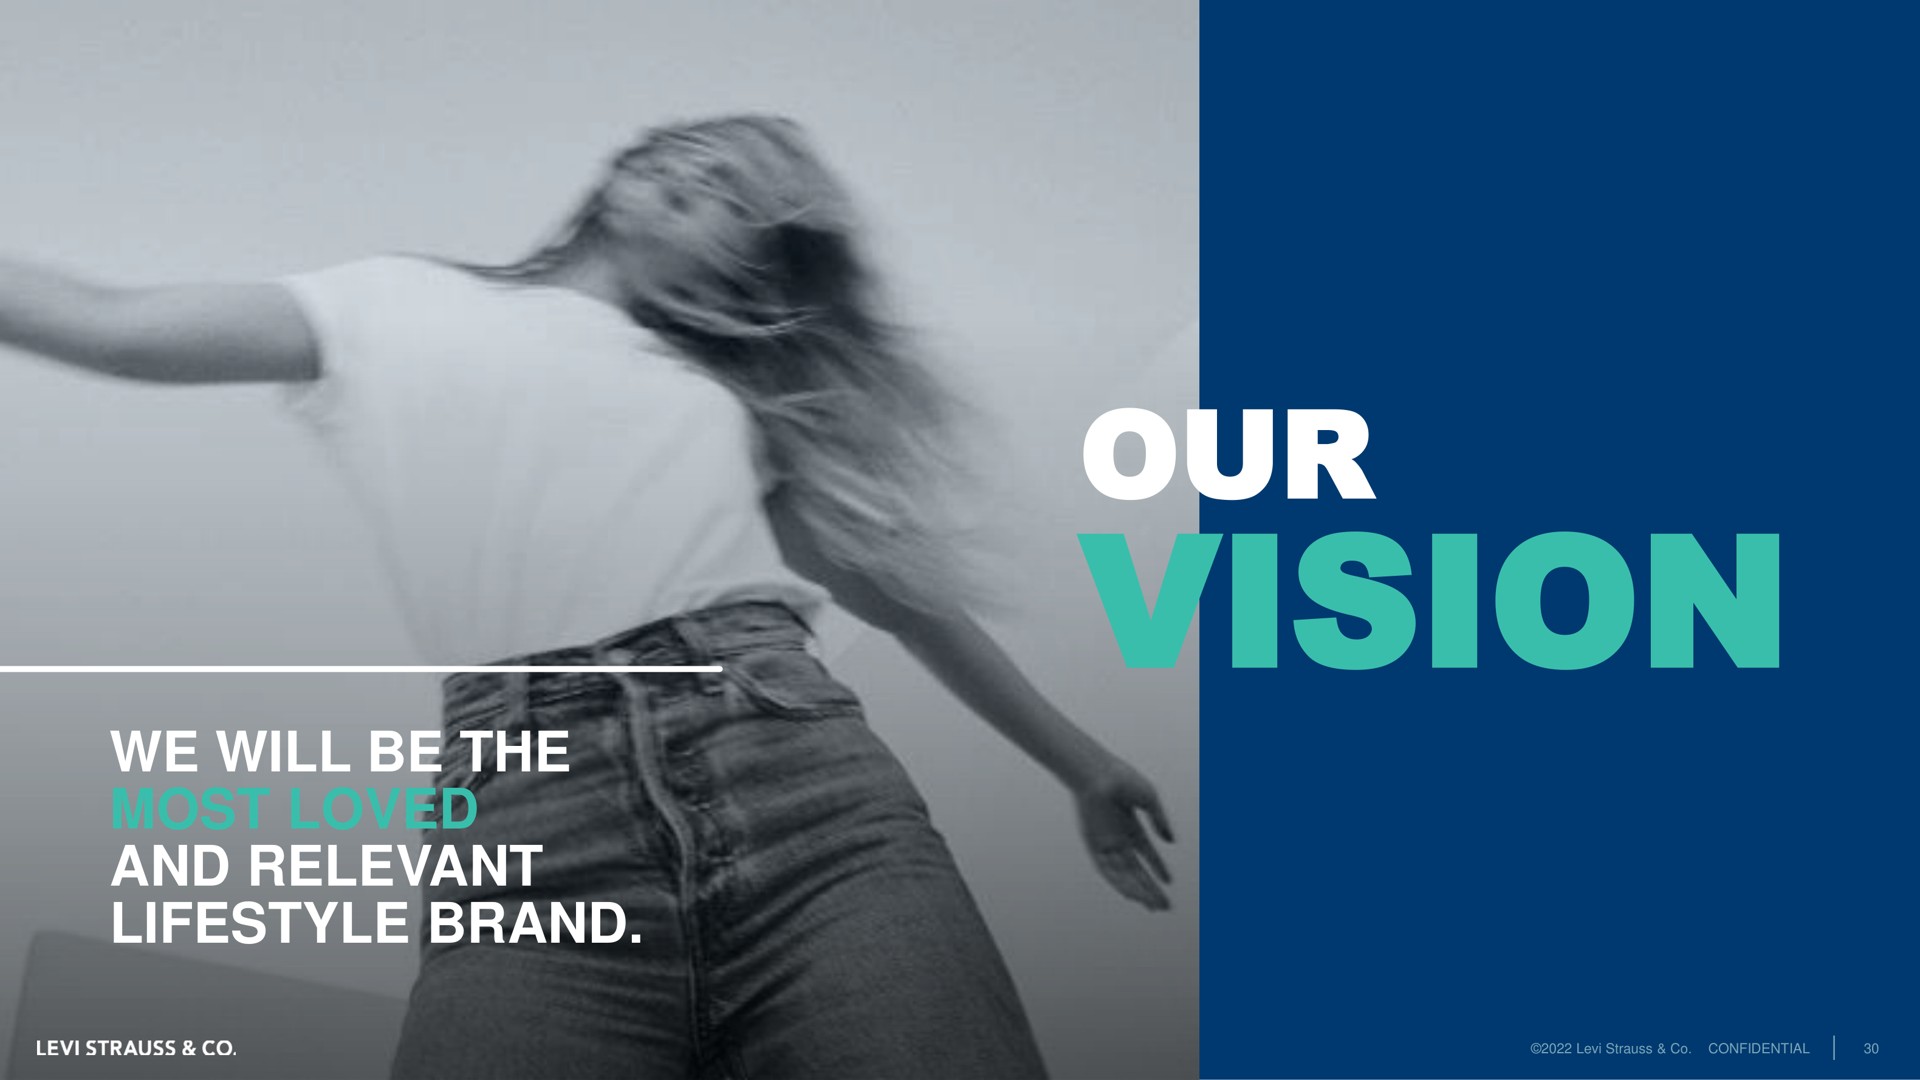 we will be the most loved and relevant brand our vision | Levi Strauss